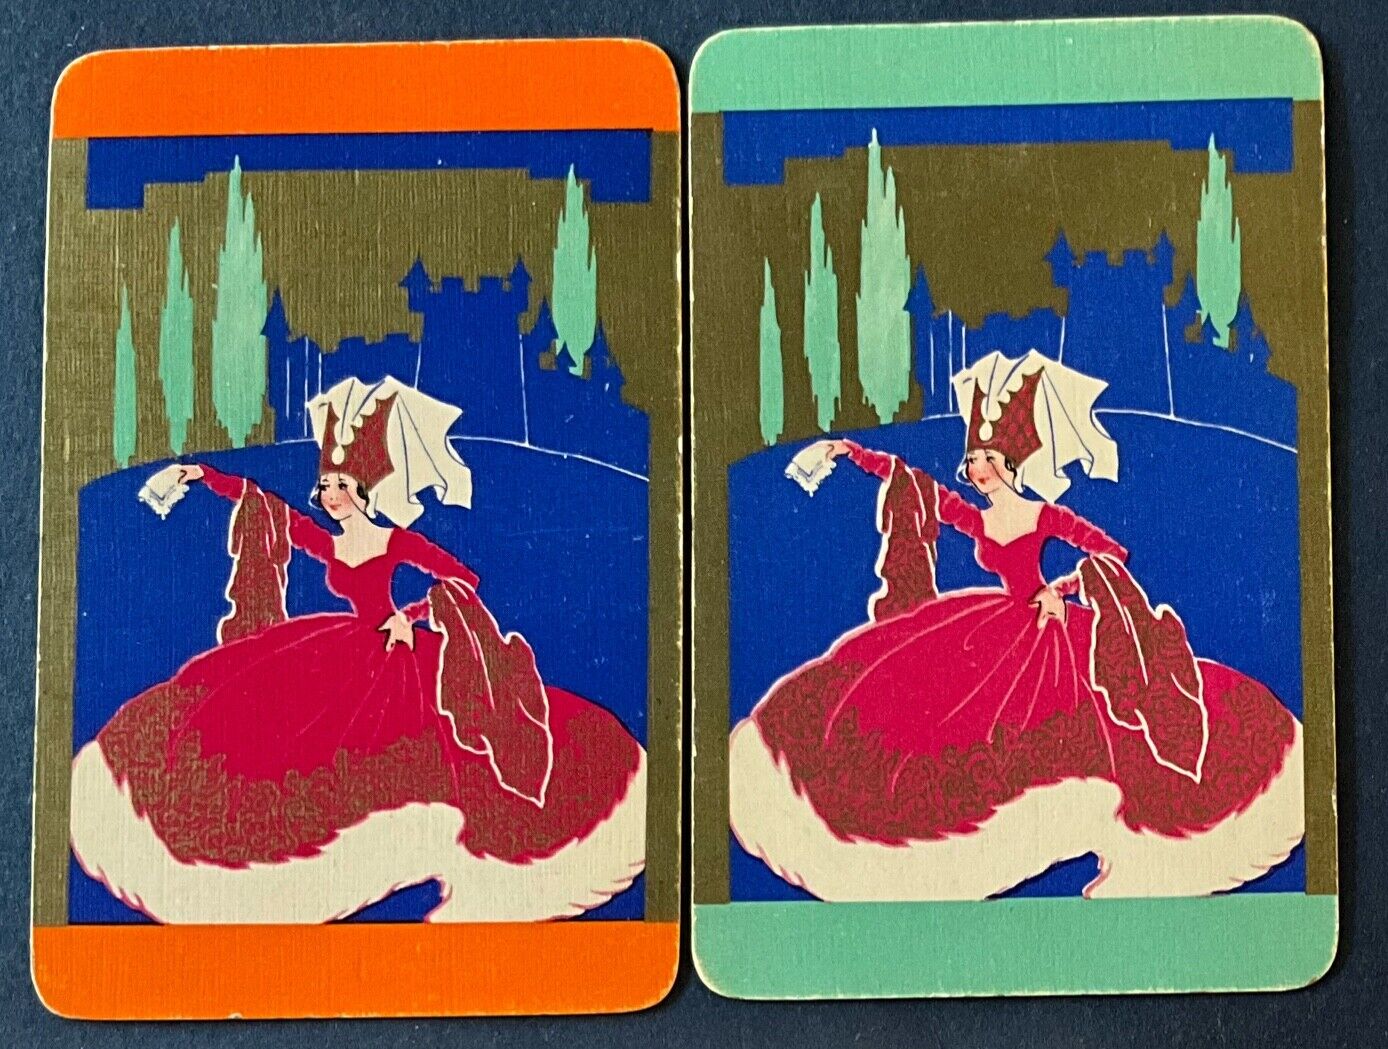 (B2P) Pair of Vintage playing cards of a medieval lady with conical hat